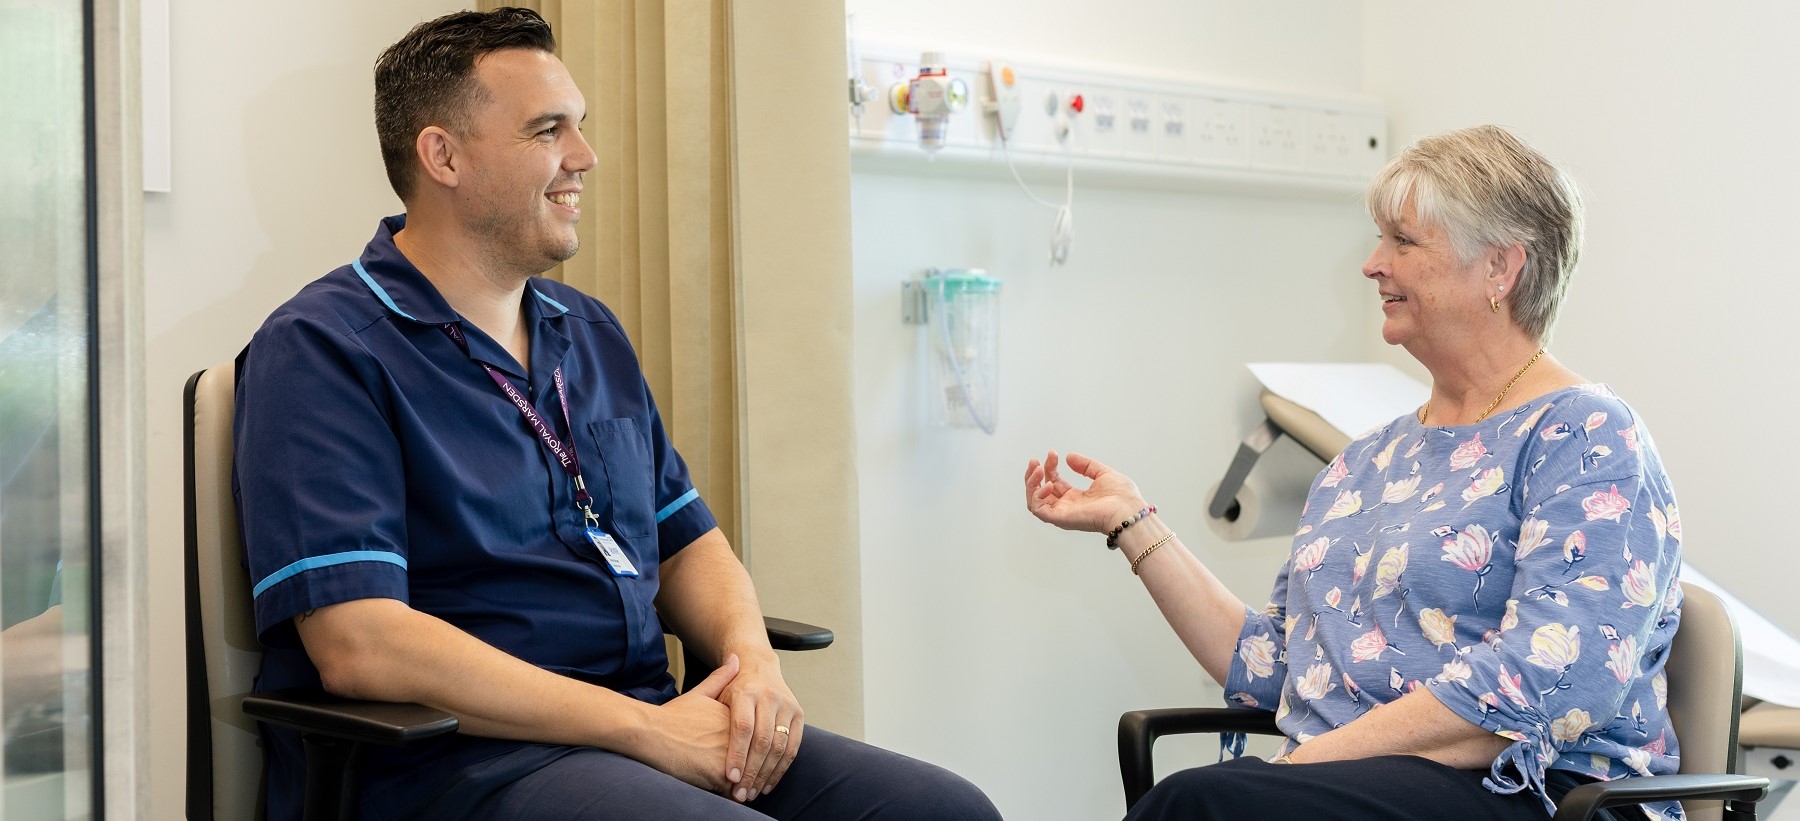 A Royal Marsden nurse sitting down and smiling and talking with a patient in a hospital room